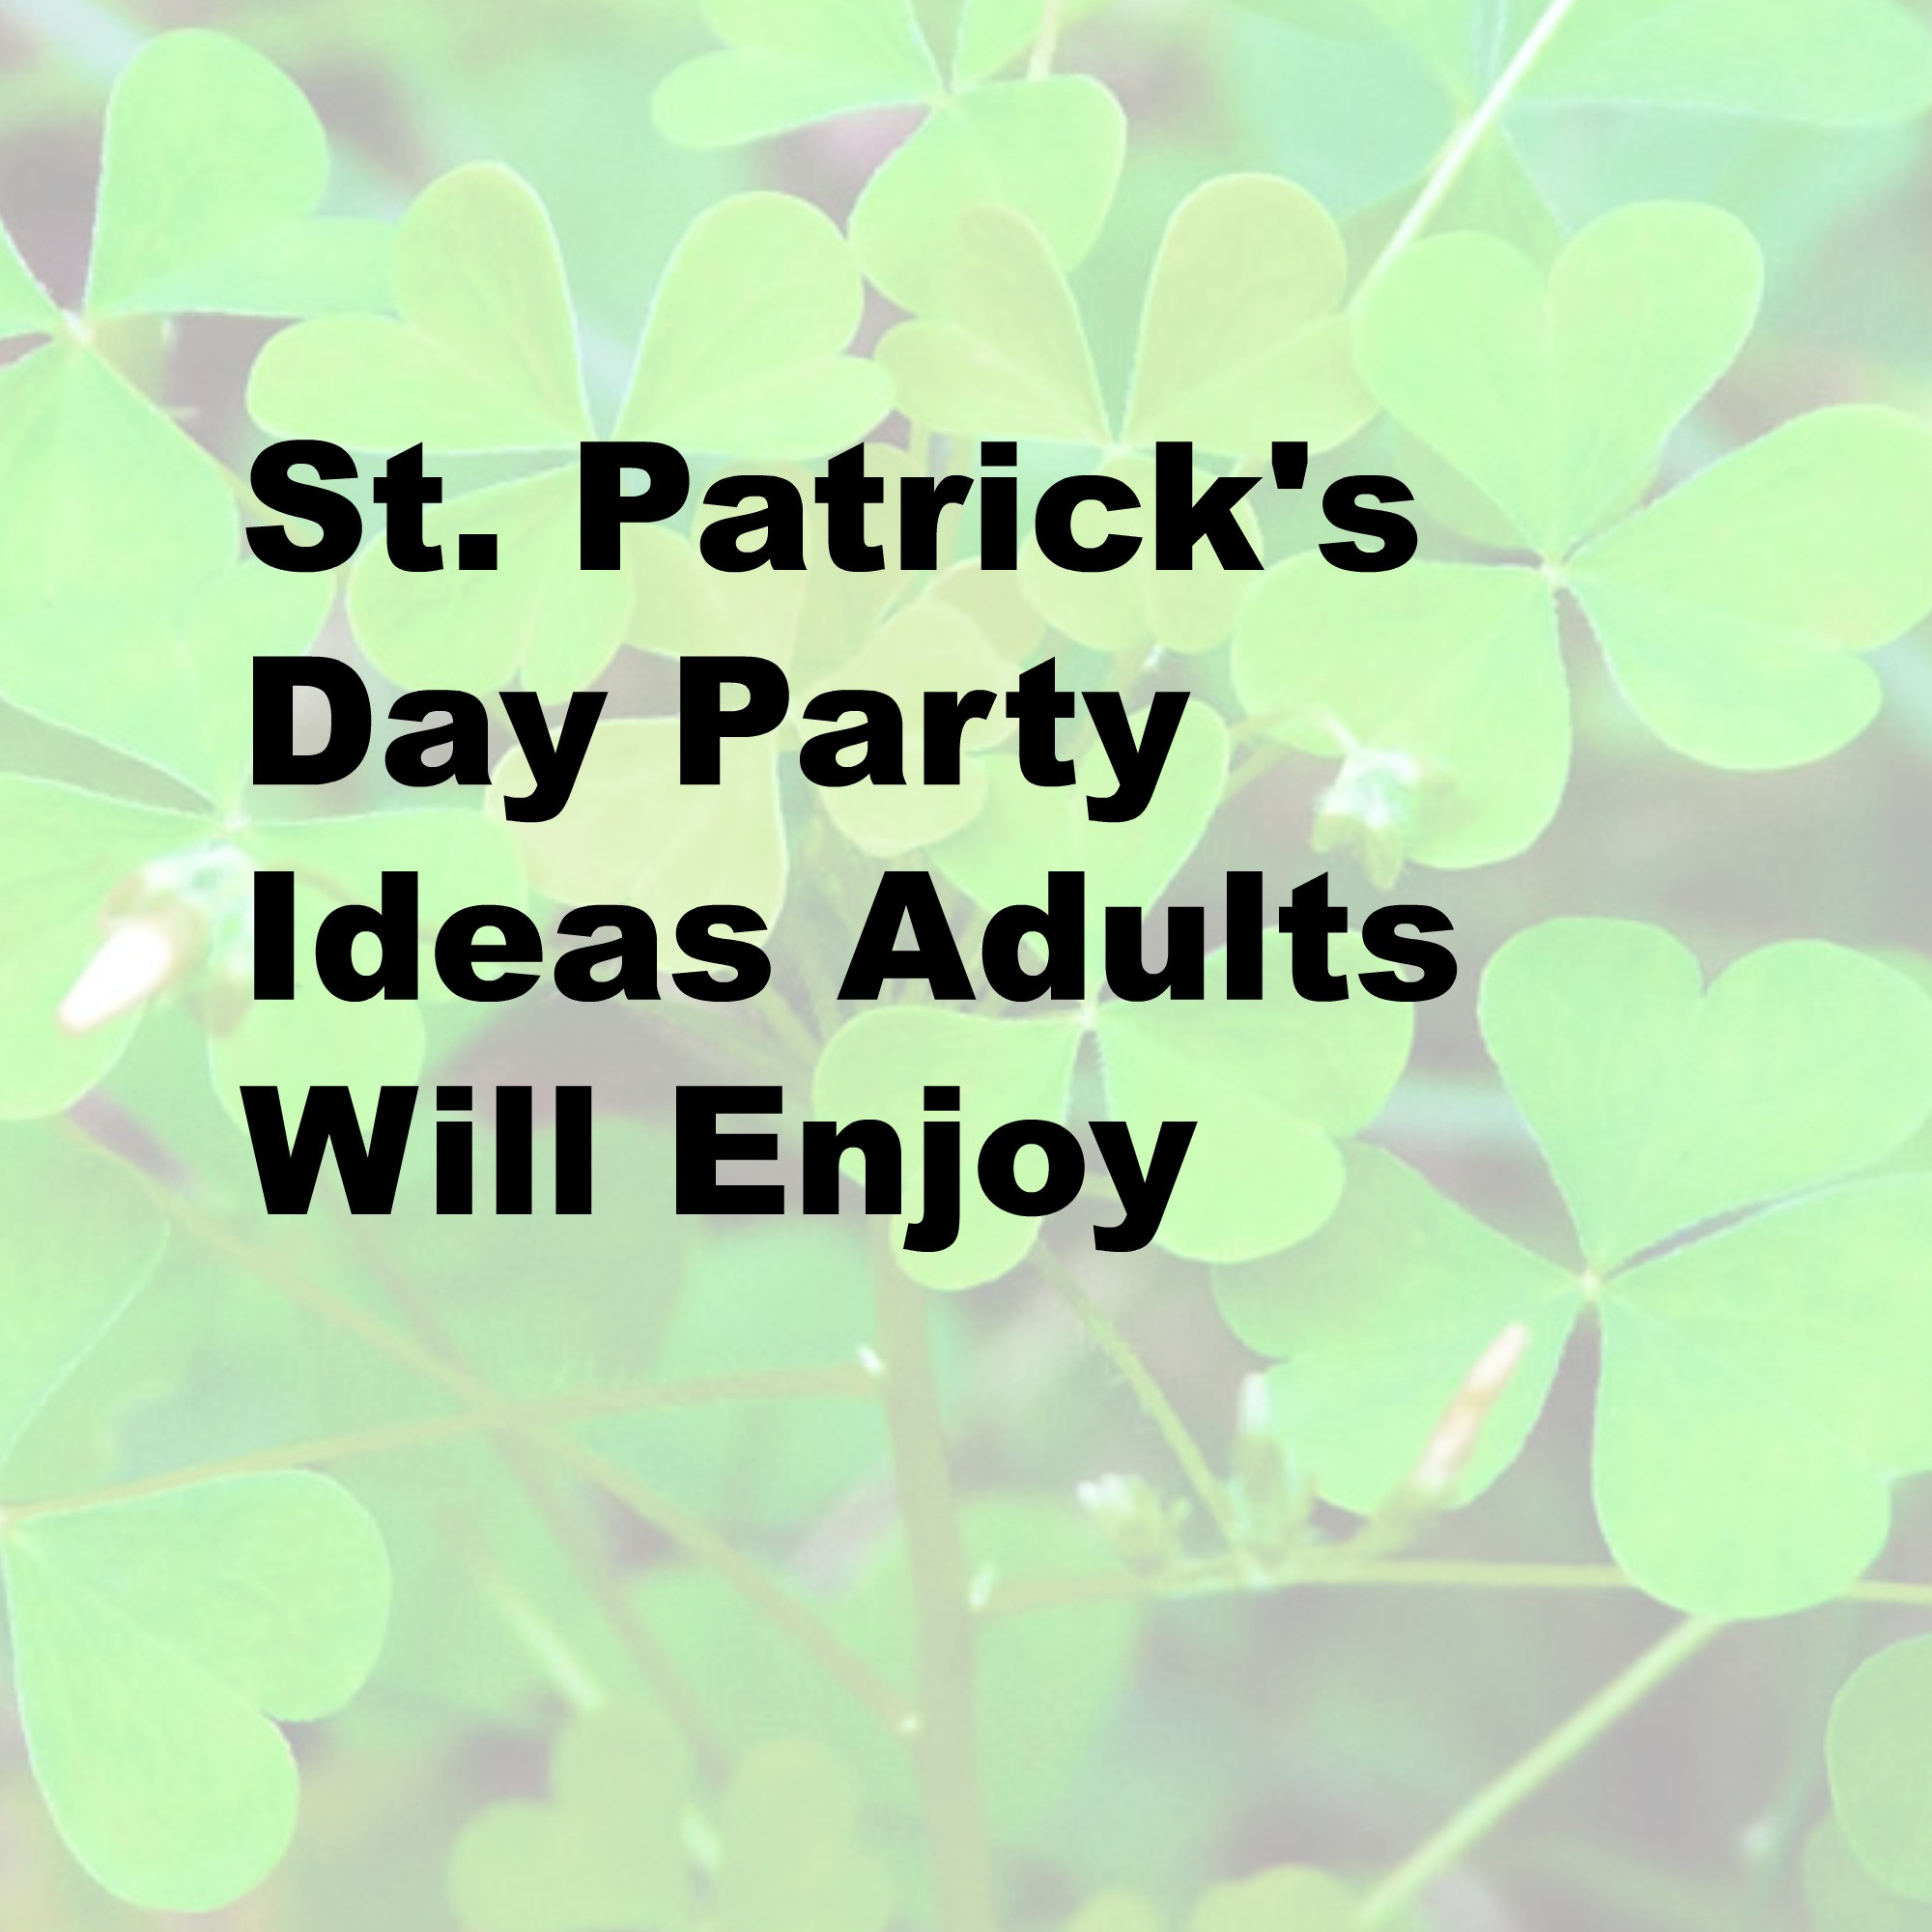 St Patrick's Day Activities For Adults
 St Patrick s Day Party Ideas Adults Will EnjoyLife After 60